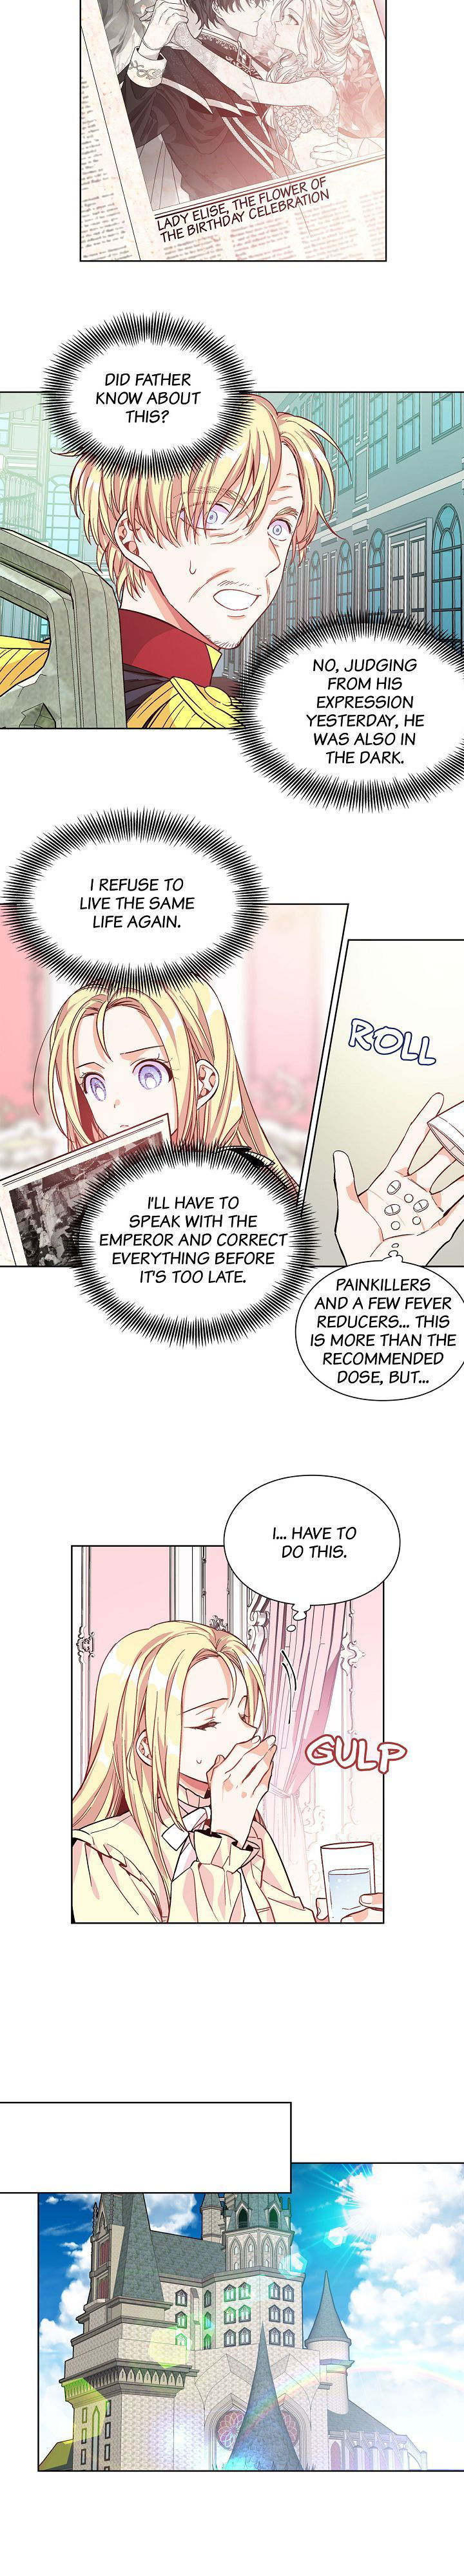 Doctor Elise: The Royal Lady with the Lamp Chapter 034 page 5